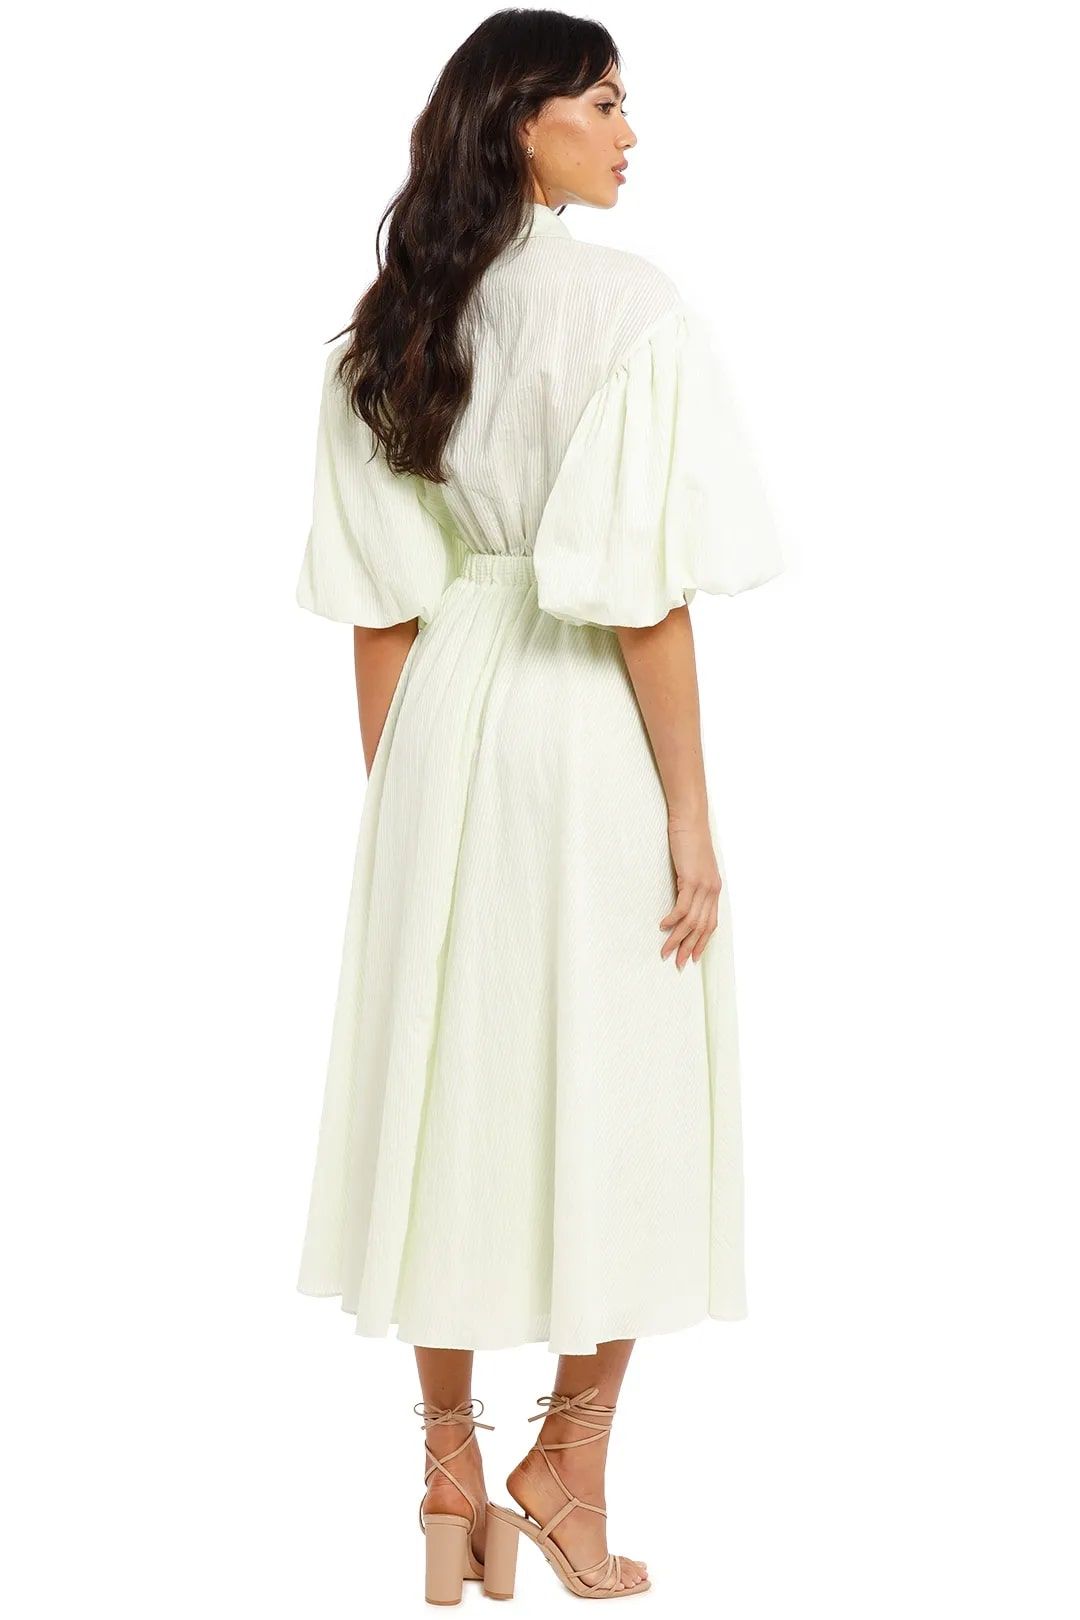 Glebe dress in iced mint for formal events.